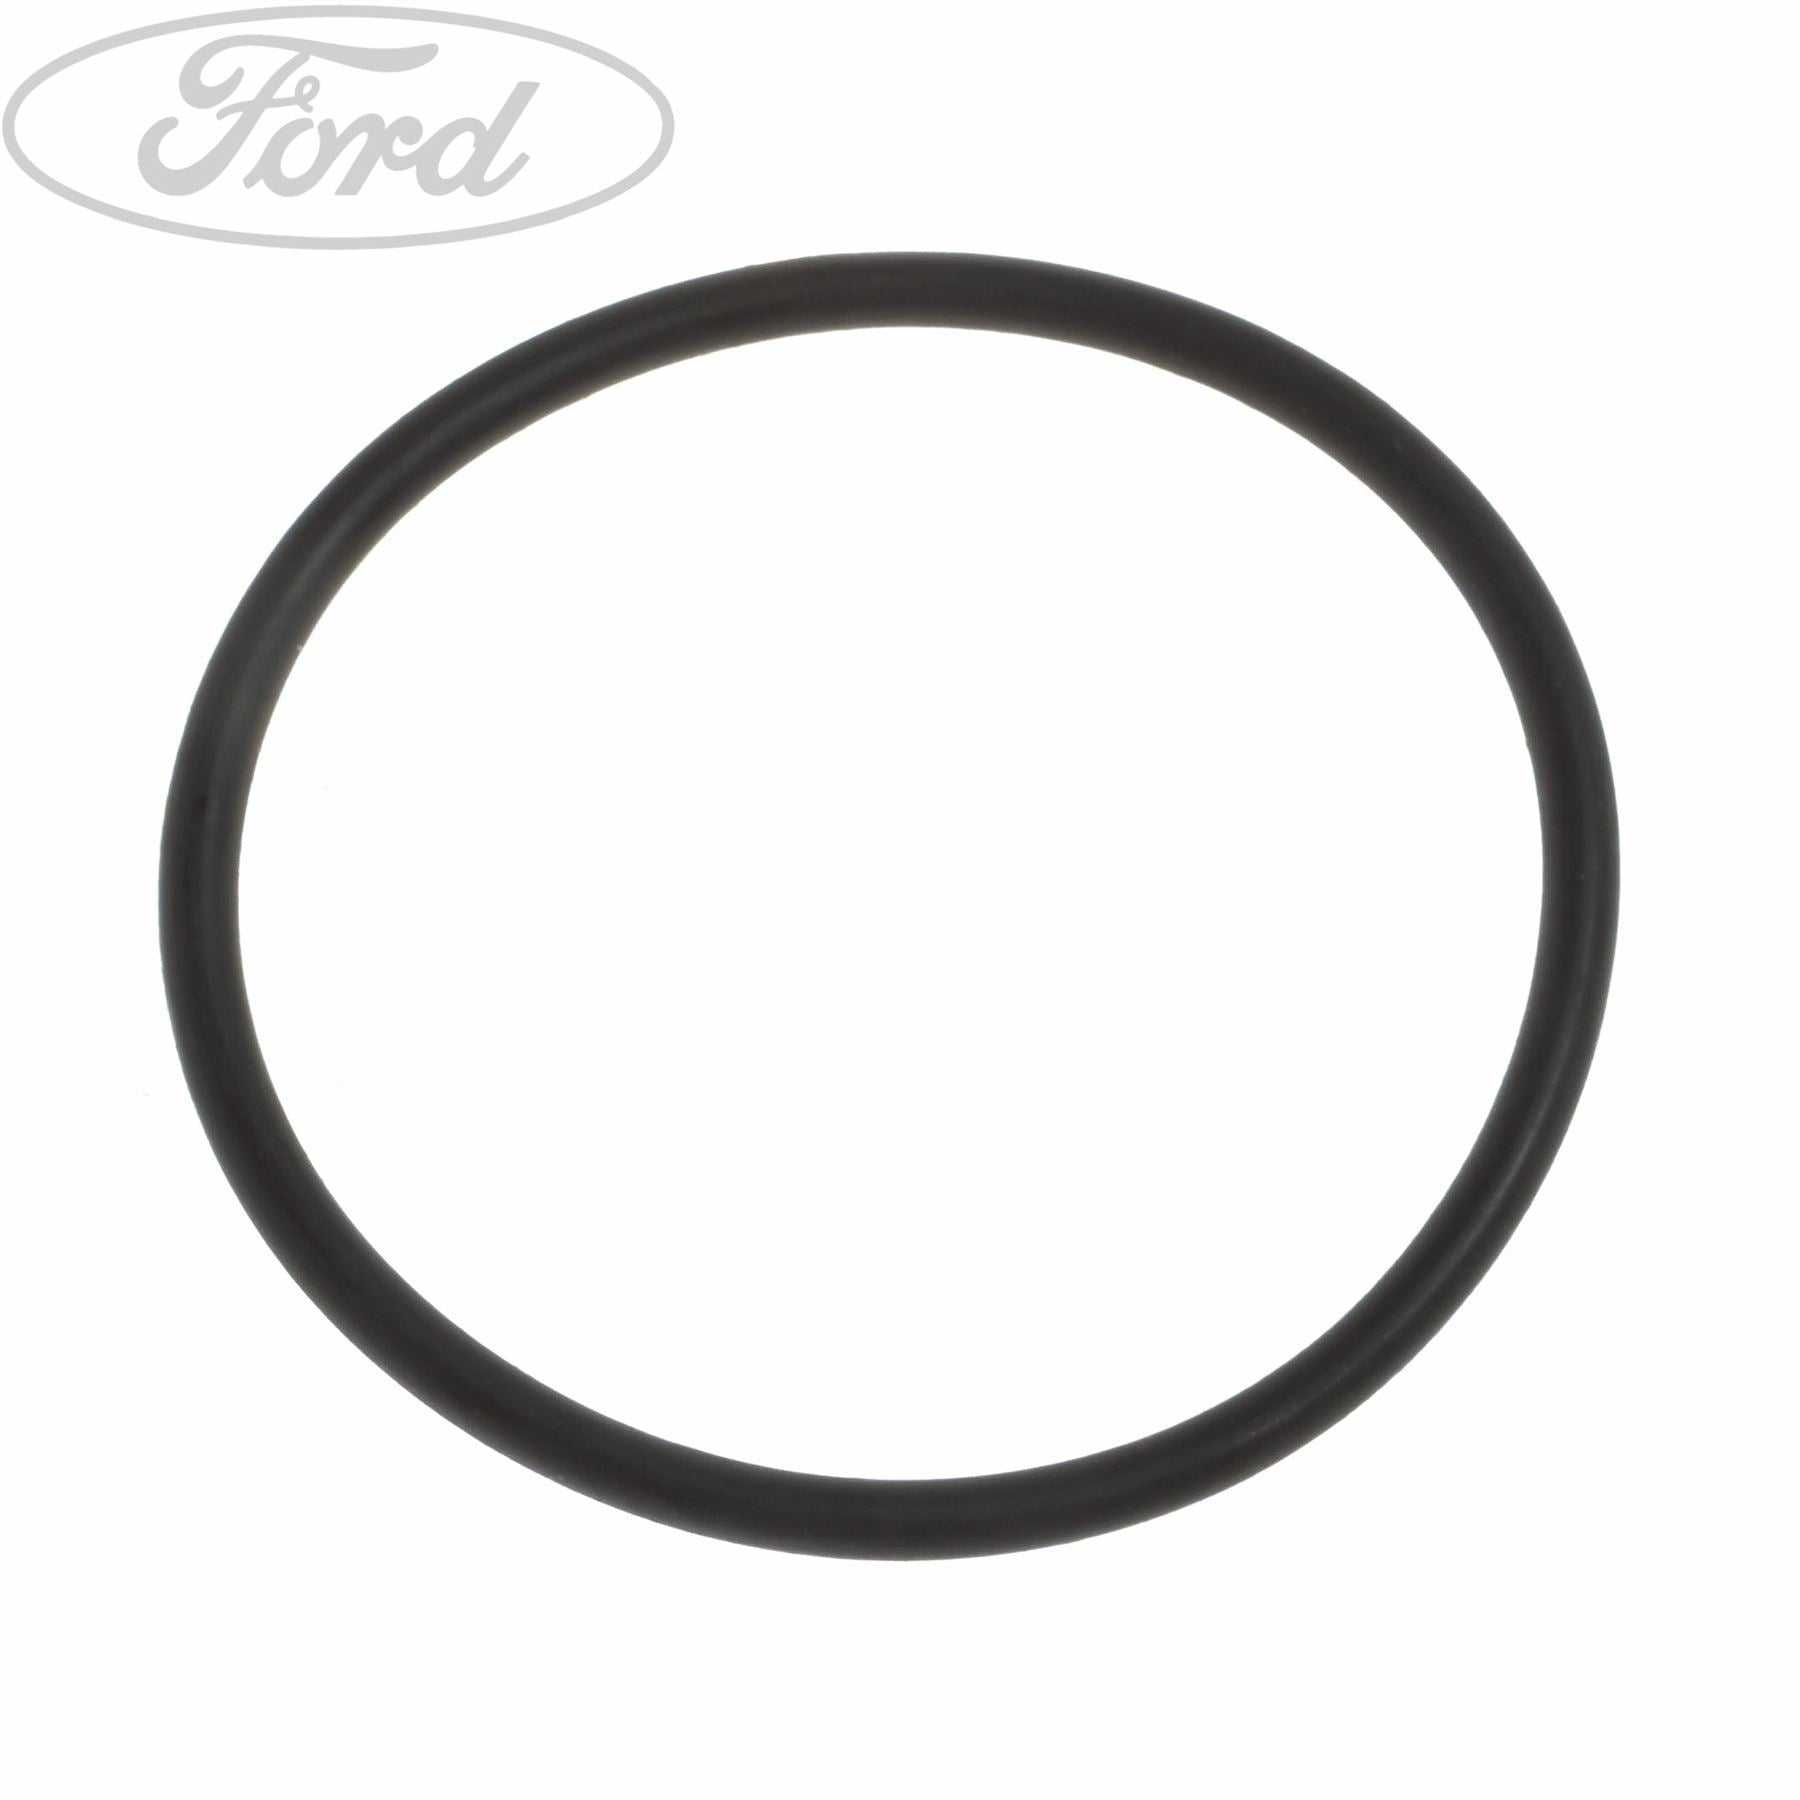 Ford, THROTTLE PLATE HOUSING O RING